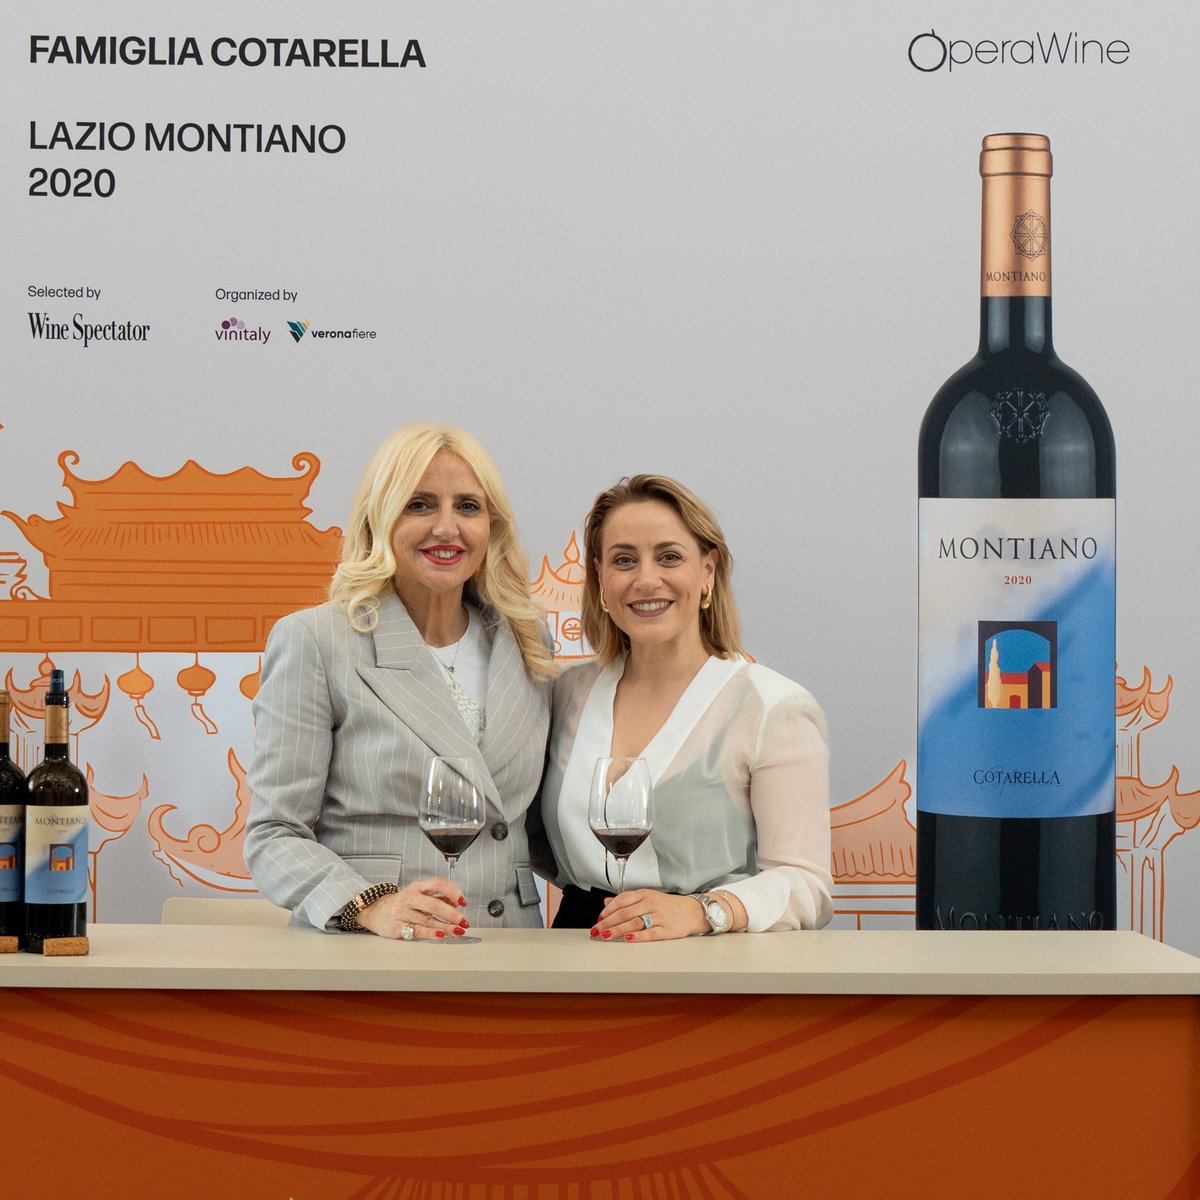 Here is the portrait of @CotarellaFamily, one of the great Italian producers selected by Wine Spectator for #OperaWine2024. During this year's Grand Tasting, they shared with guests their Lazio Montiano 2020. Congratulations again! #OperaWine #Vinitaly2024 #finestitalianwines